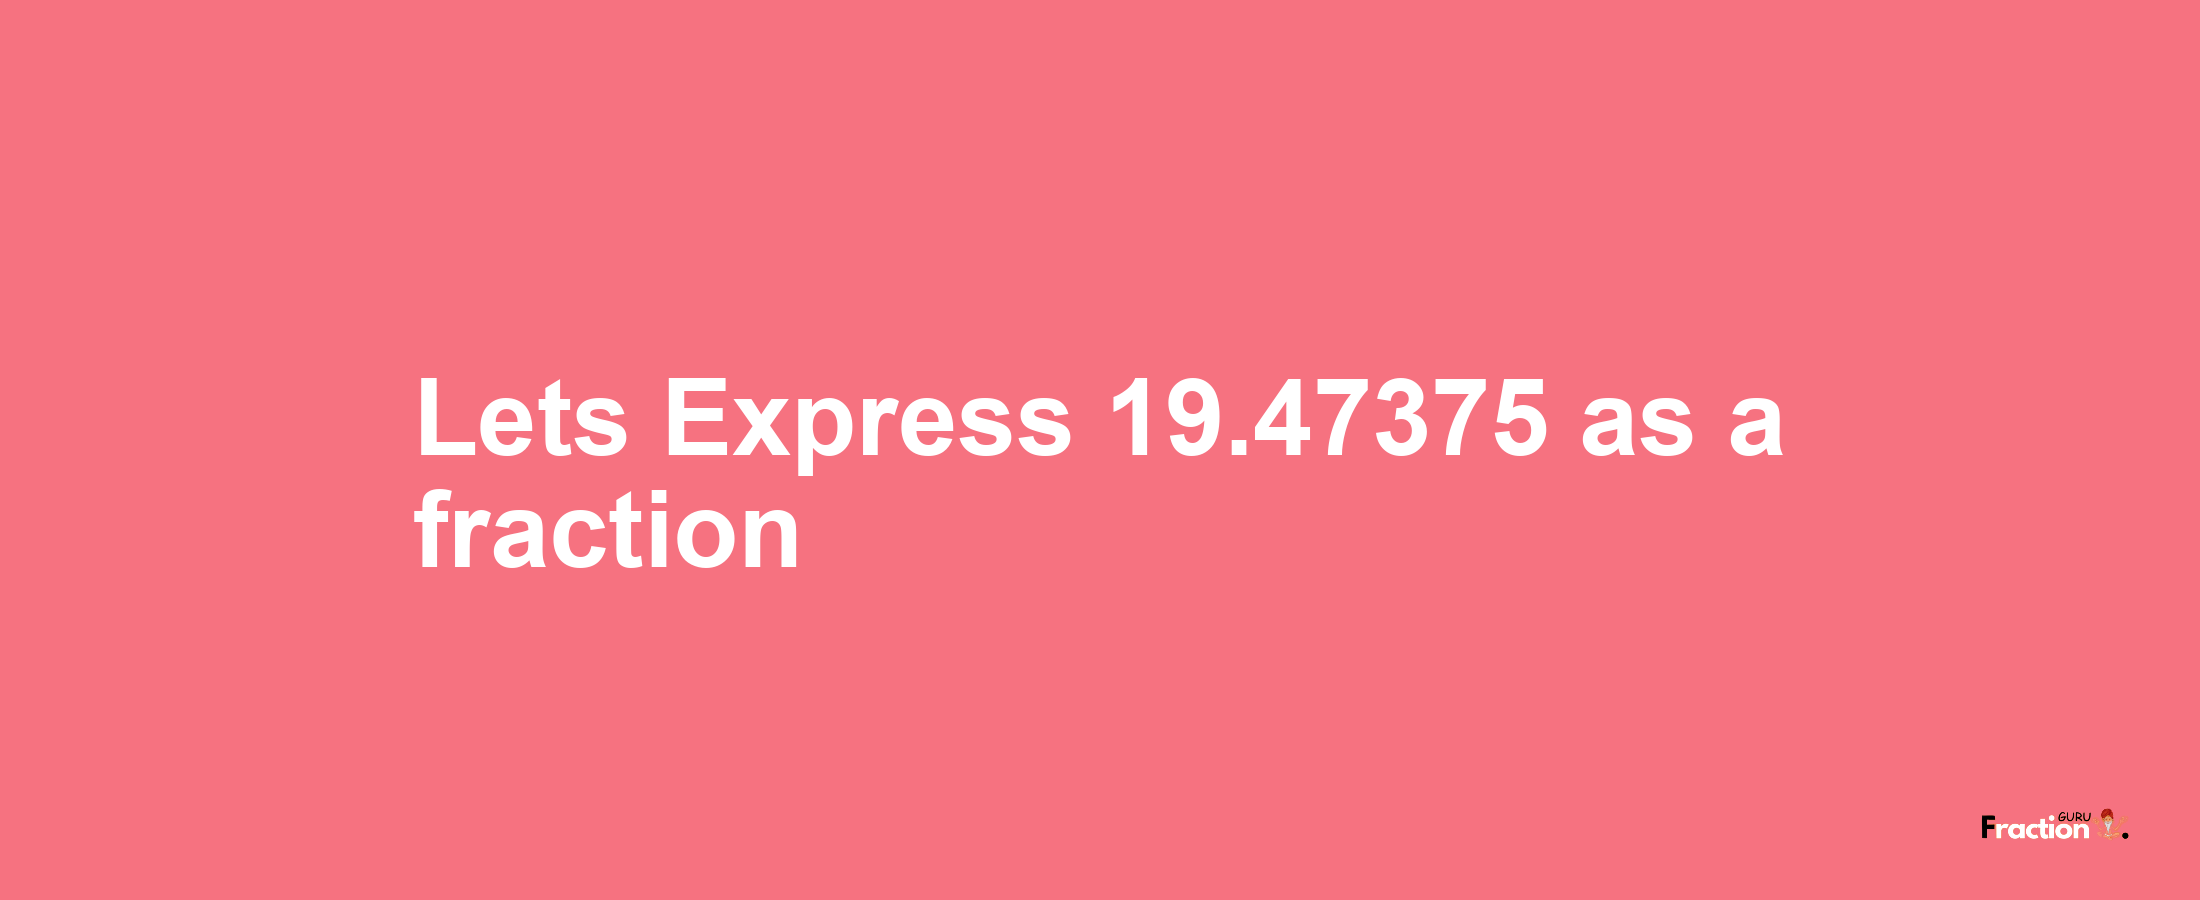 Lets Express 19.47375 as afraction